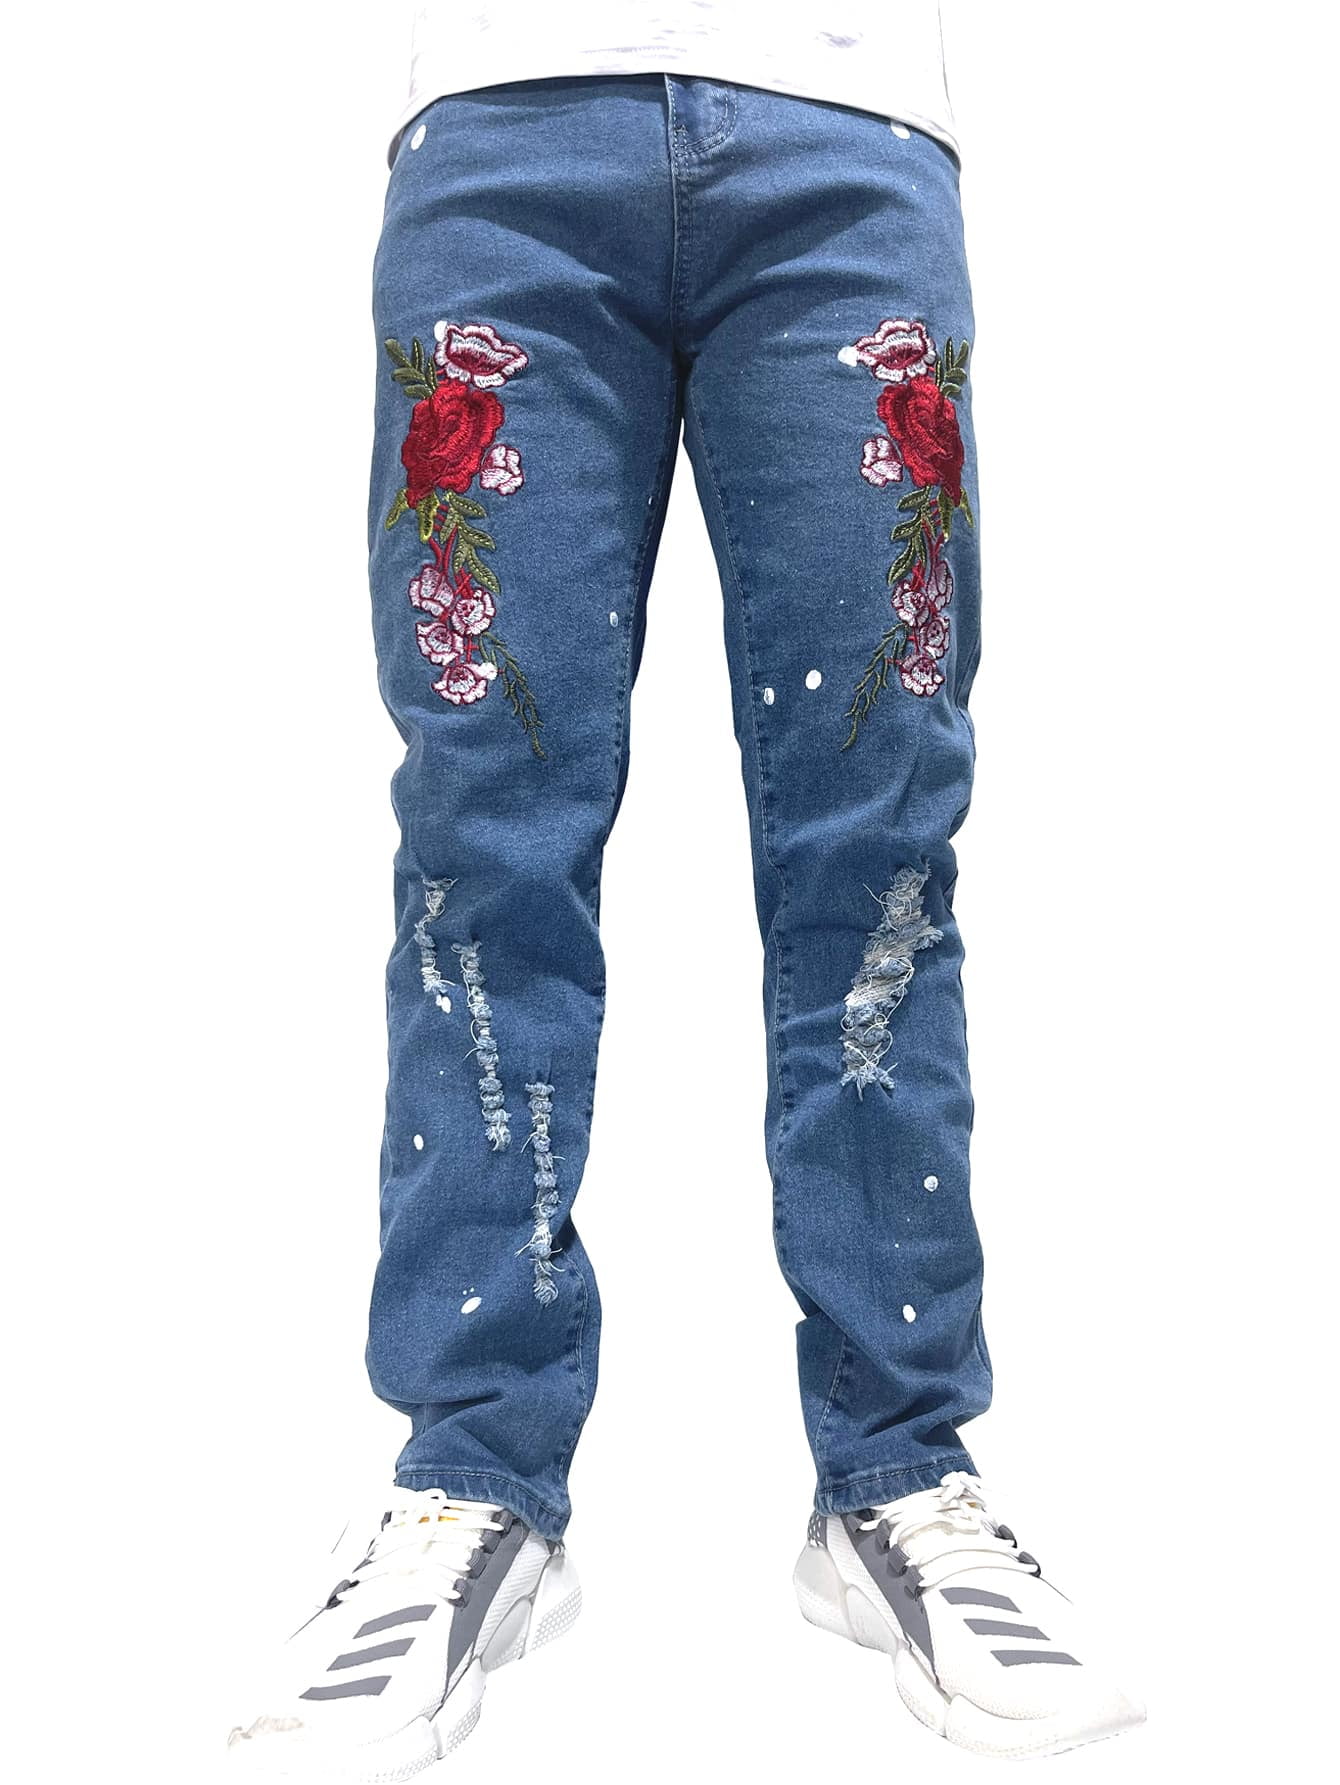 KIDS FASHION Trousers Embroidery discount 87% Zara jeans Navy Blue 18-24M 